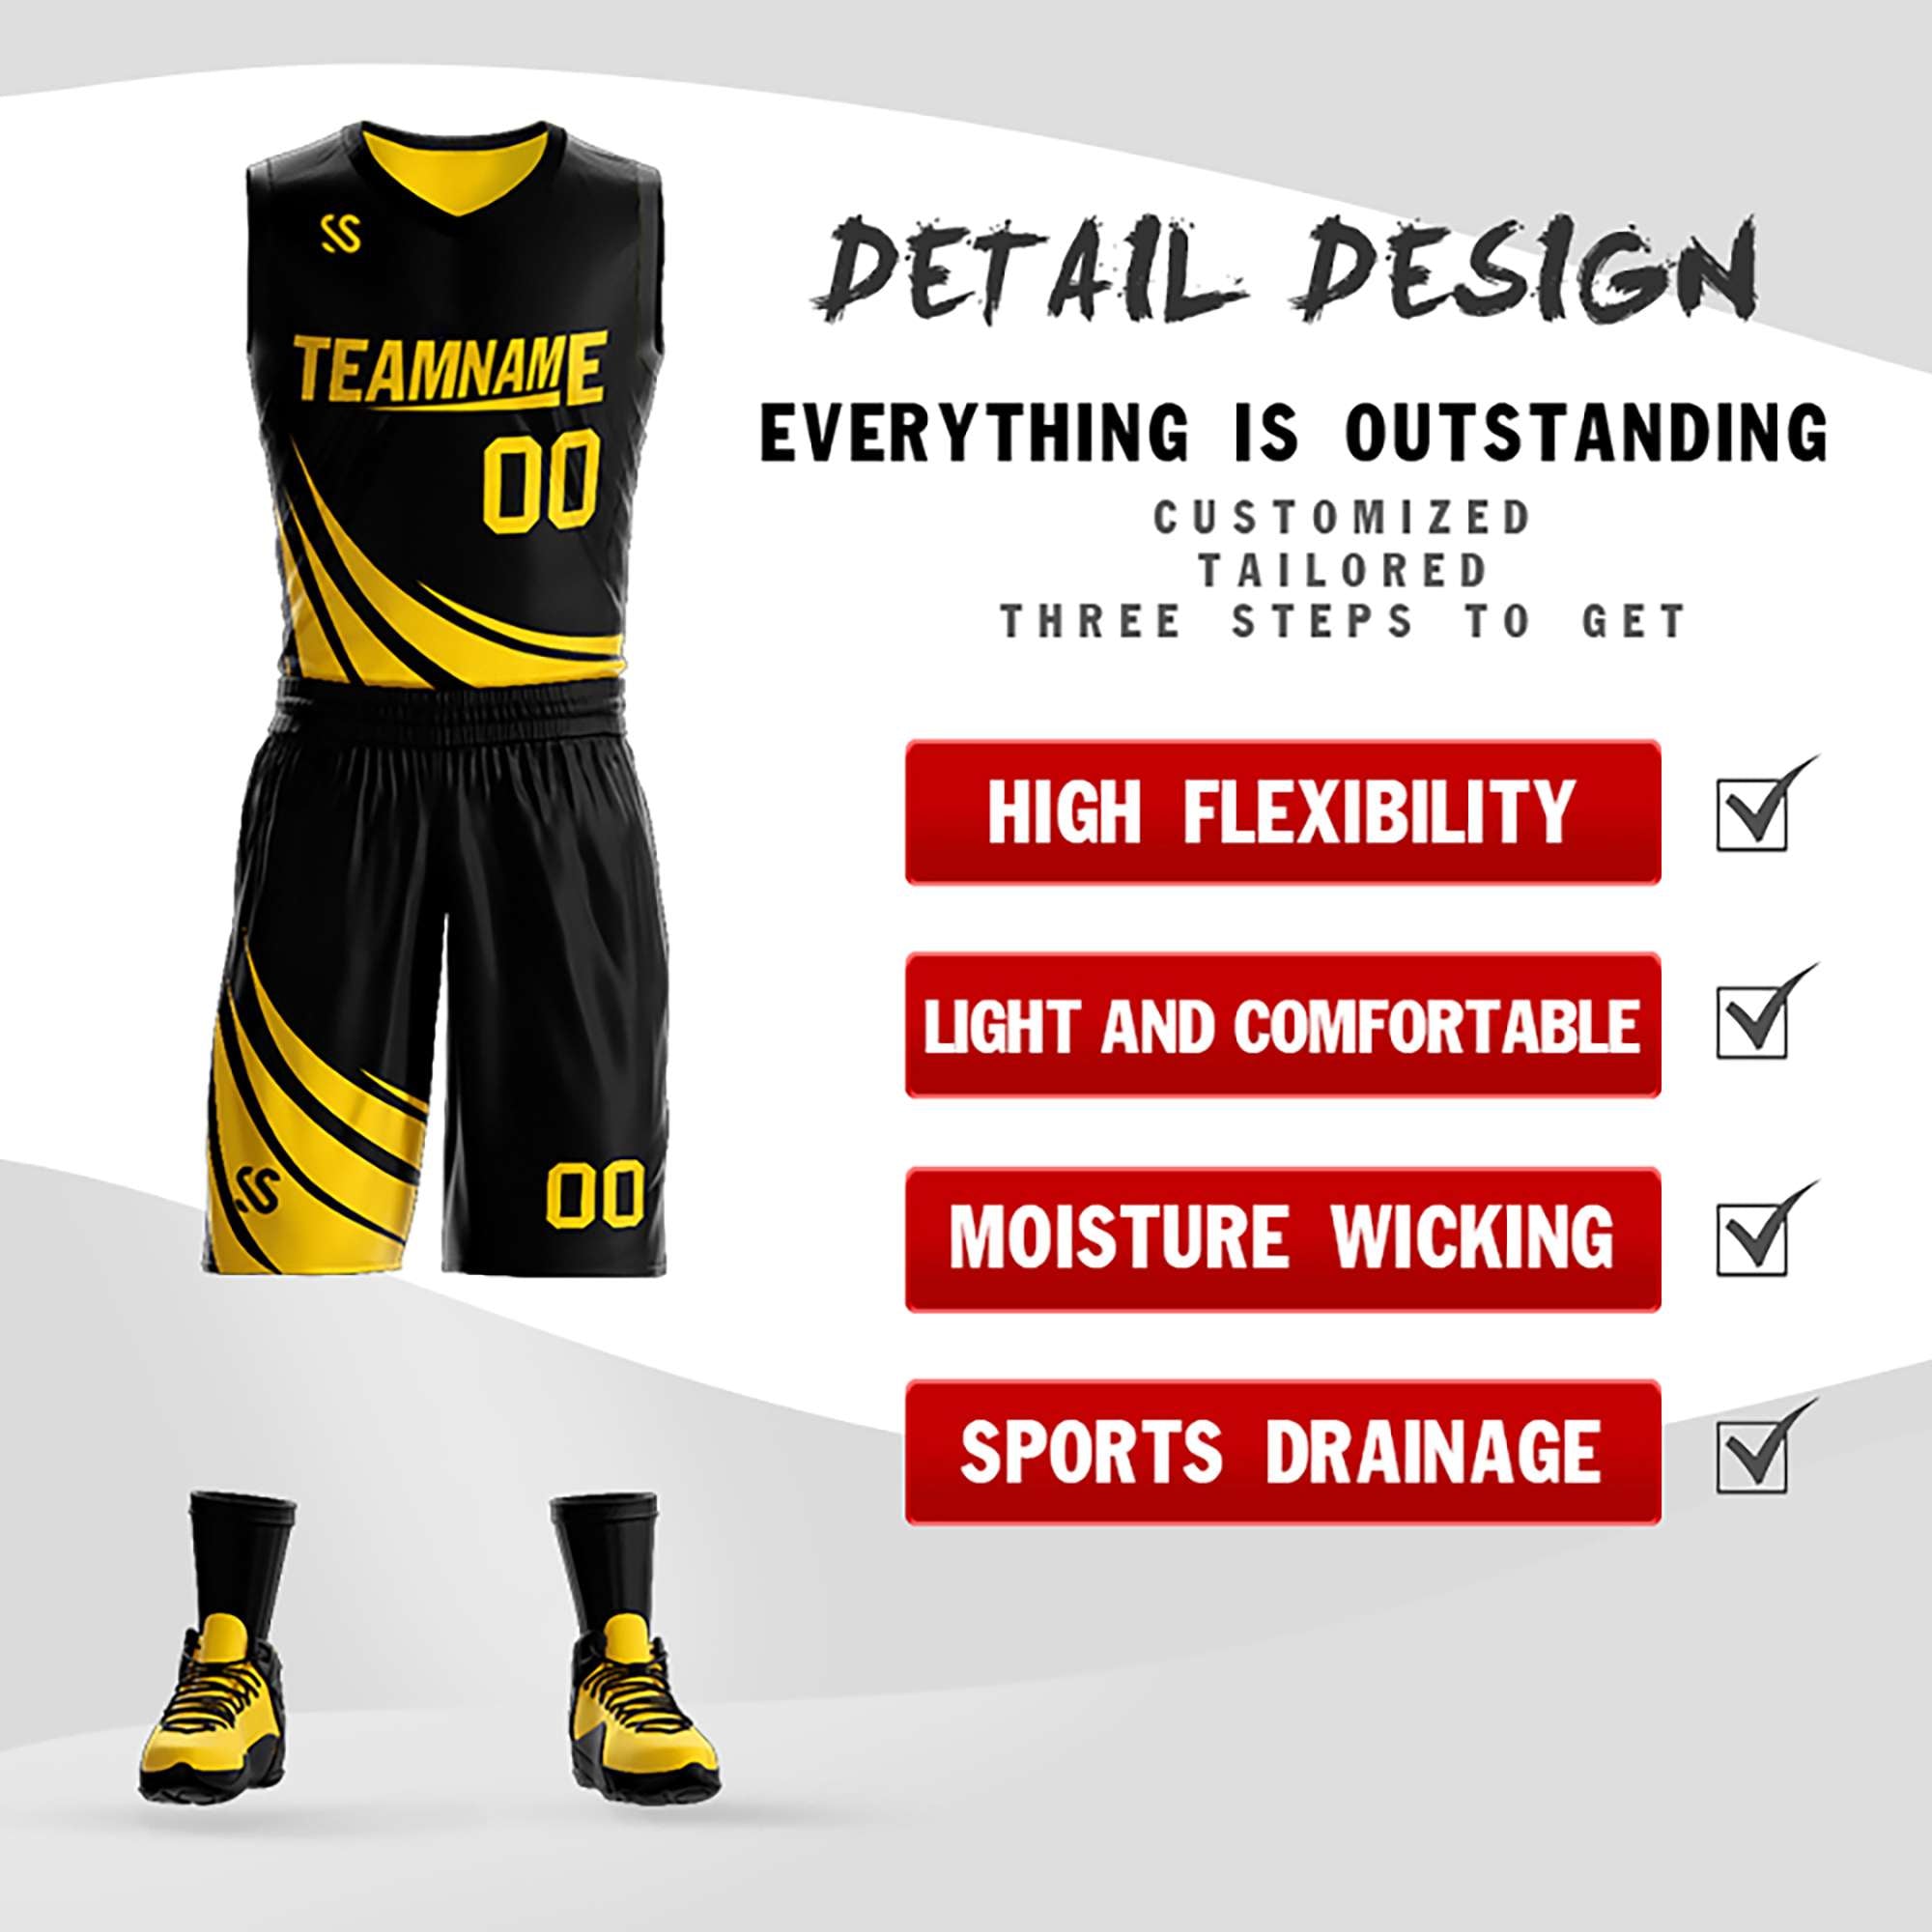 Woman's Color Yellow Sublimation Basketball Jersey Uniform Design - Buy  Color Yellow Sublimation Basketball Jersey Product on